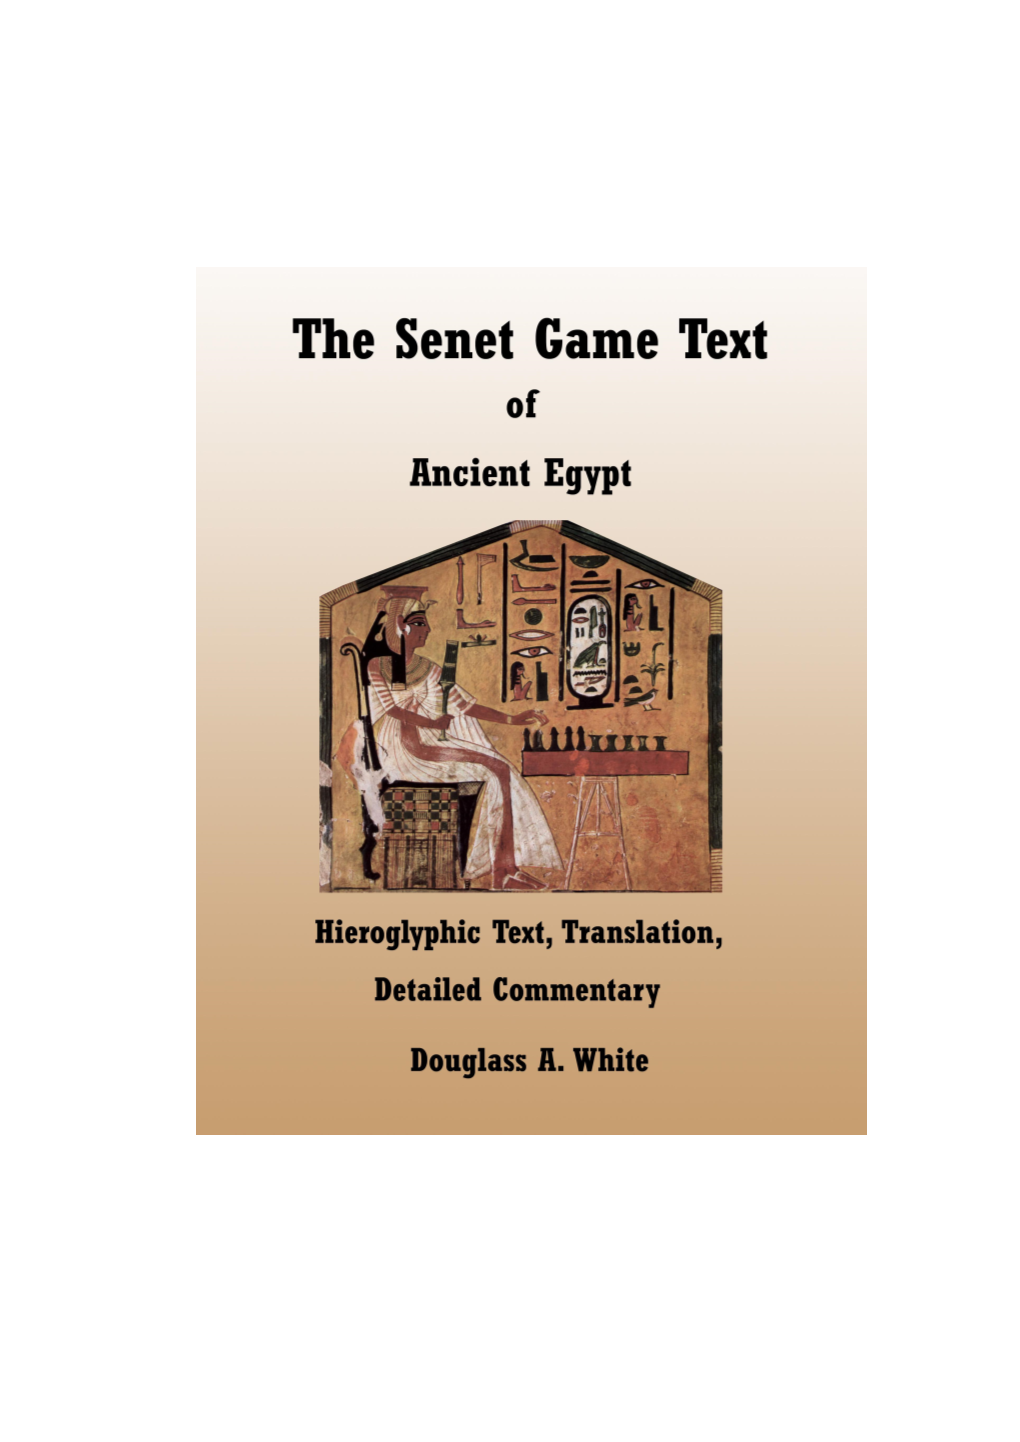 The Senet Game Text of Ancient Egypt